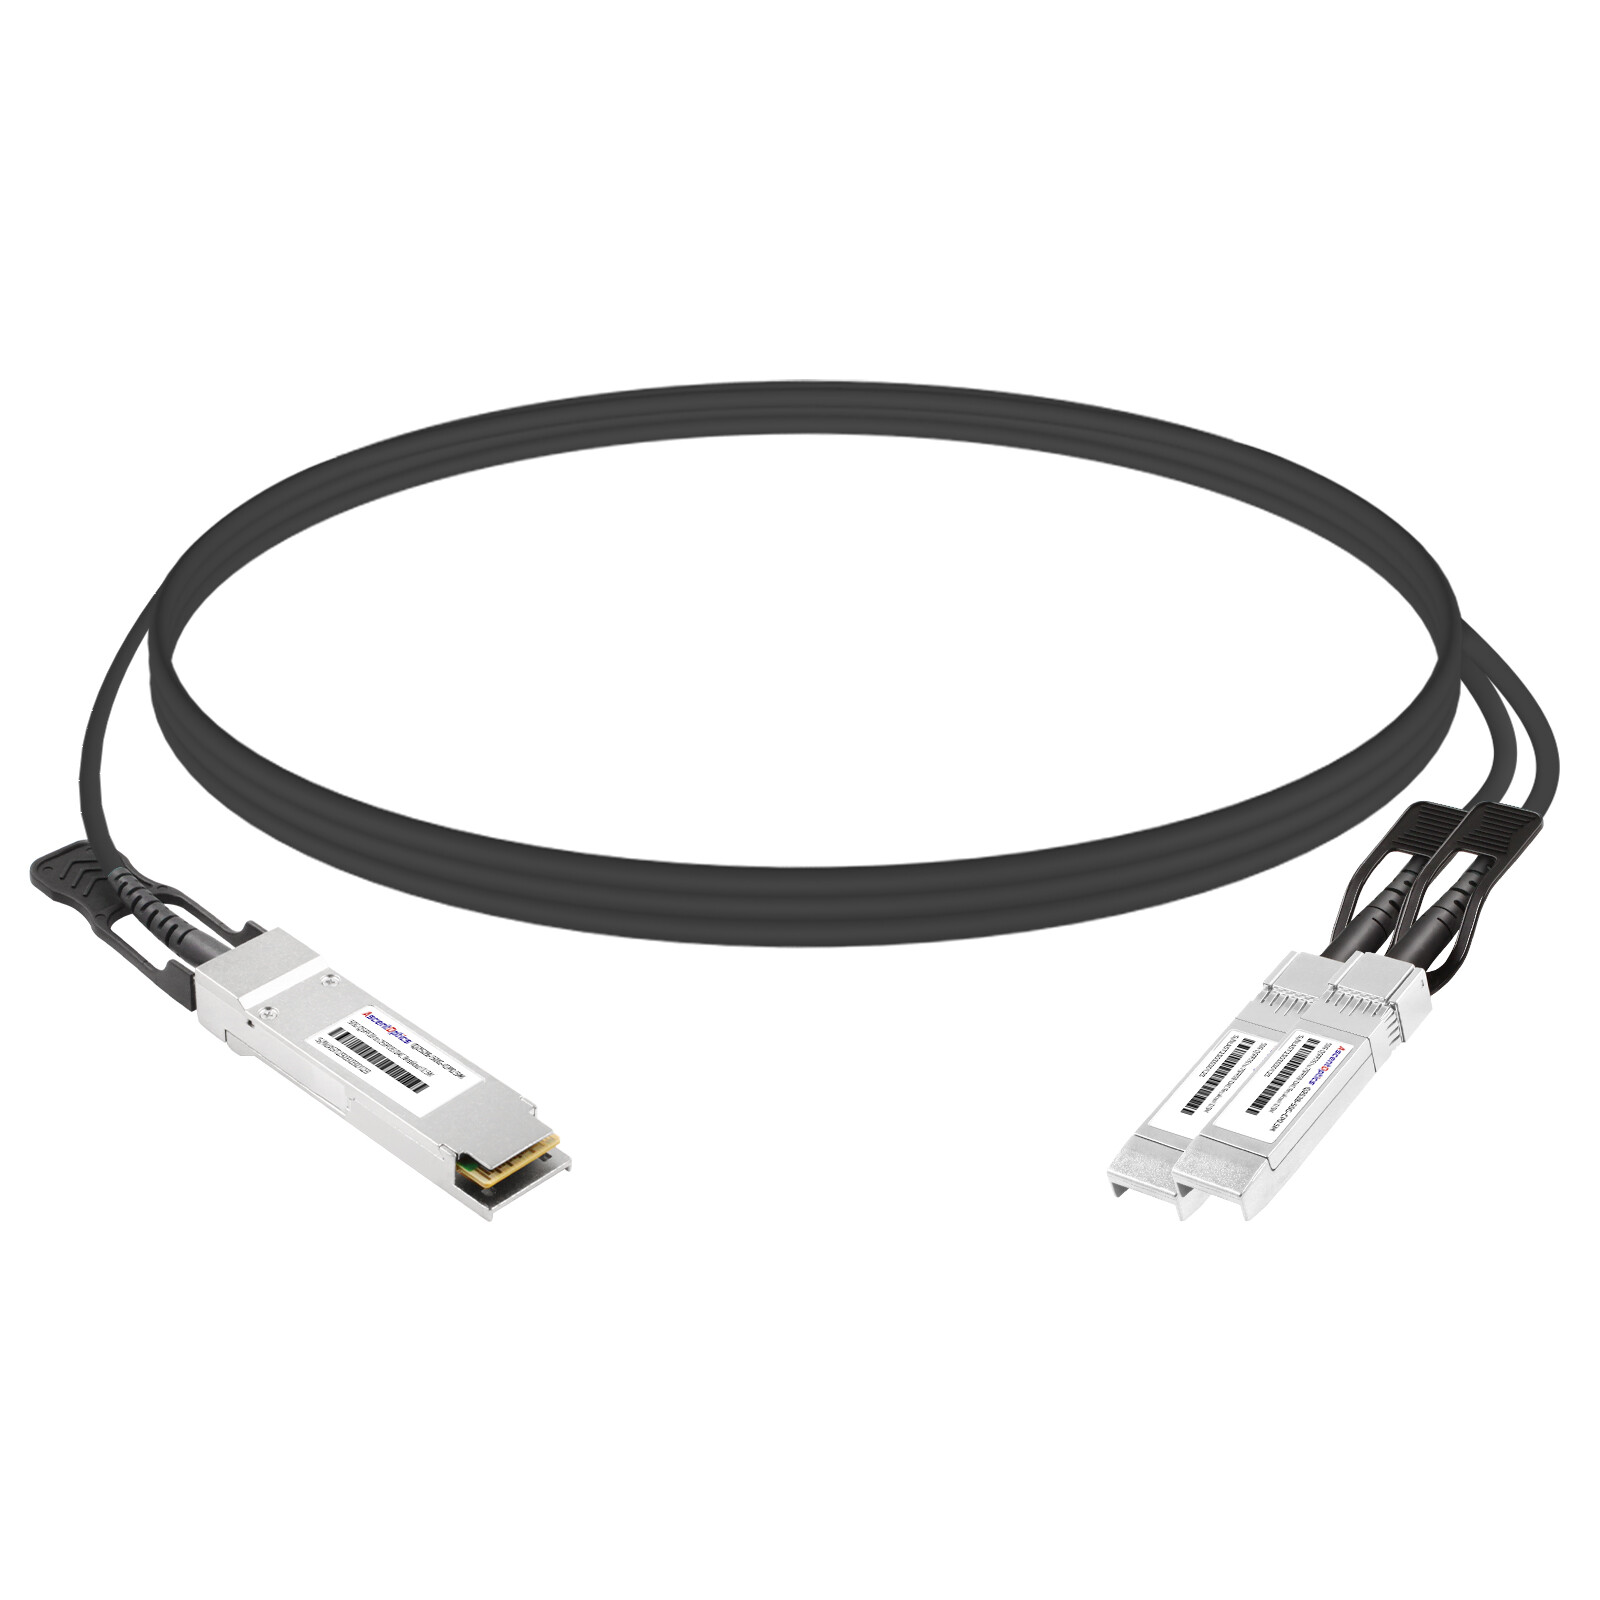 50G DSFP to 2x 25G SFP28 Copper Breakout Cable,0.5 Meter,Passive